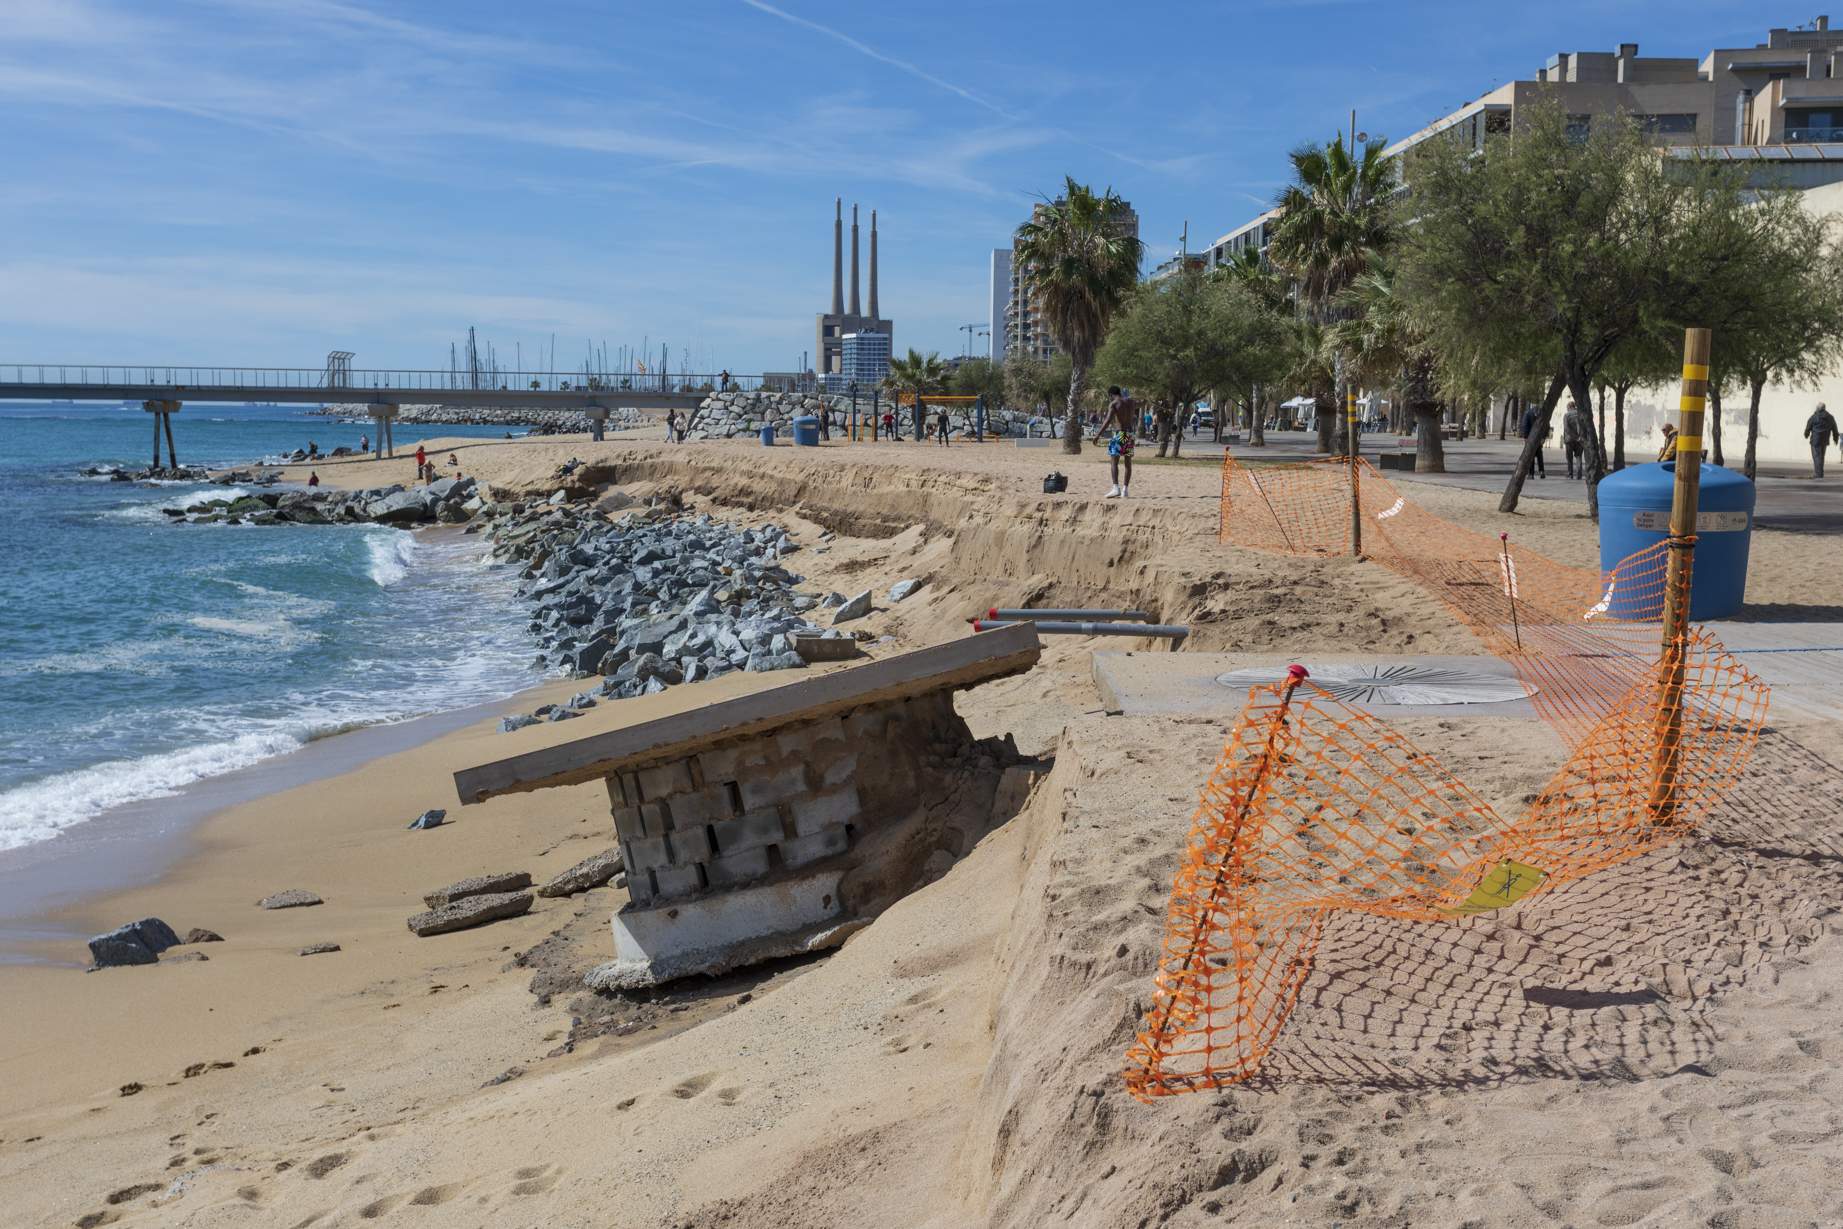 Gone with the wind and the waves: the beach damage from Storm Nelson along the Barcelona coast